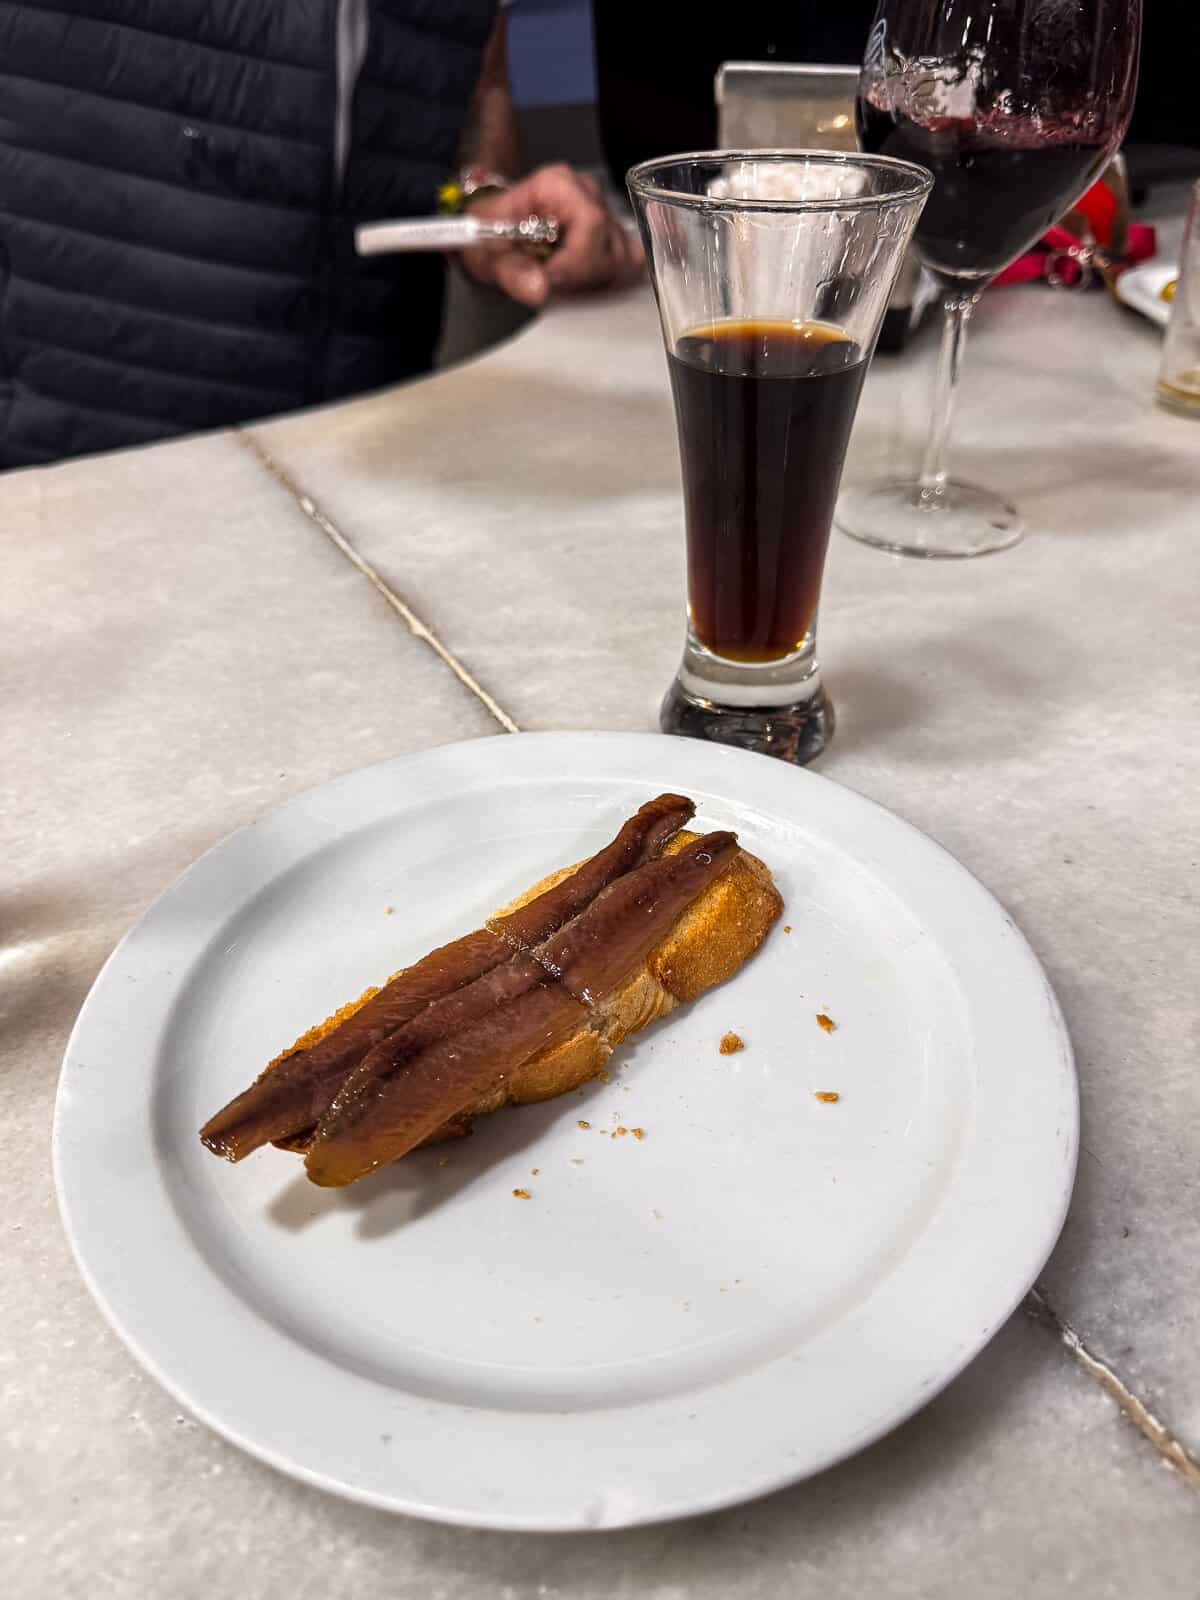 A close-up of a simple Spanish snack on a white plate, featuring crispy bread topped with anchovies, beside a tall glass of dark vermouth, set on a marble table with casual dining background.